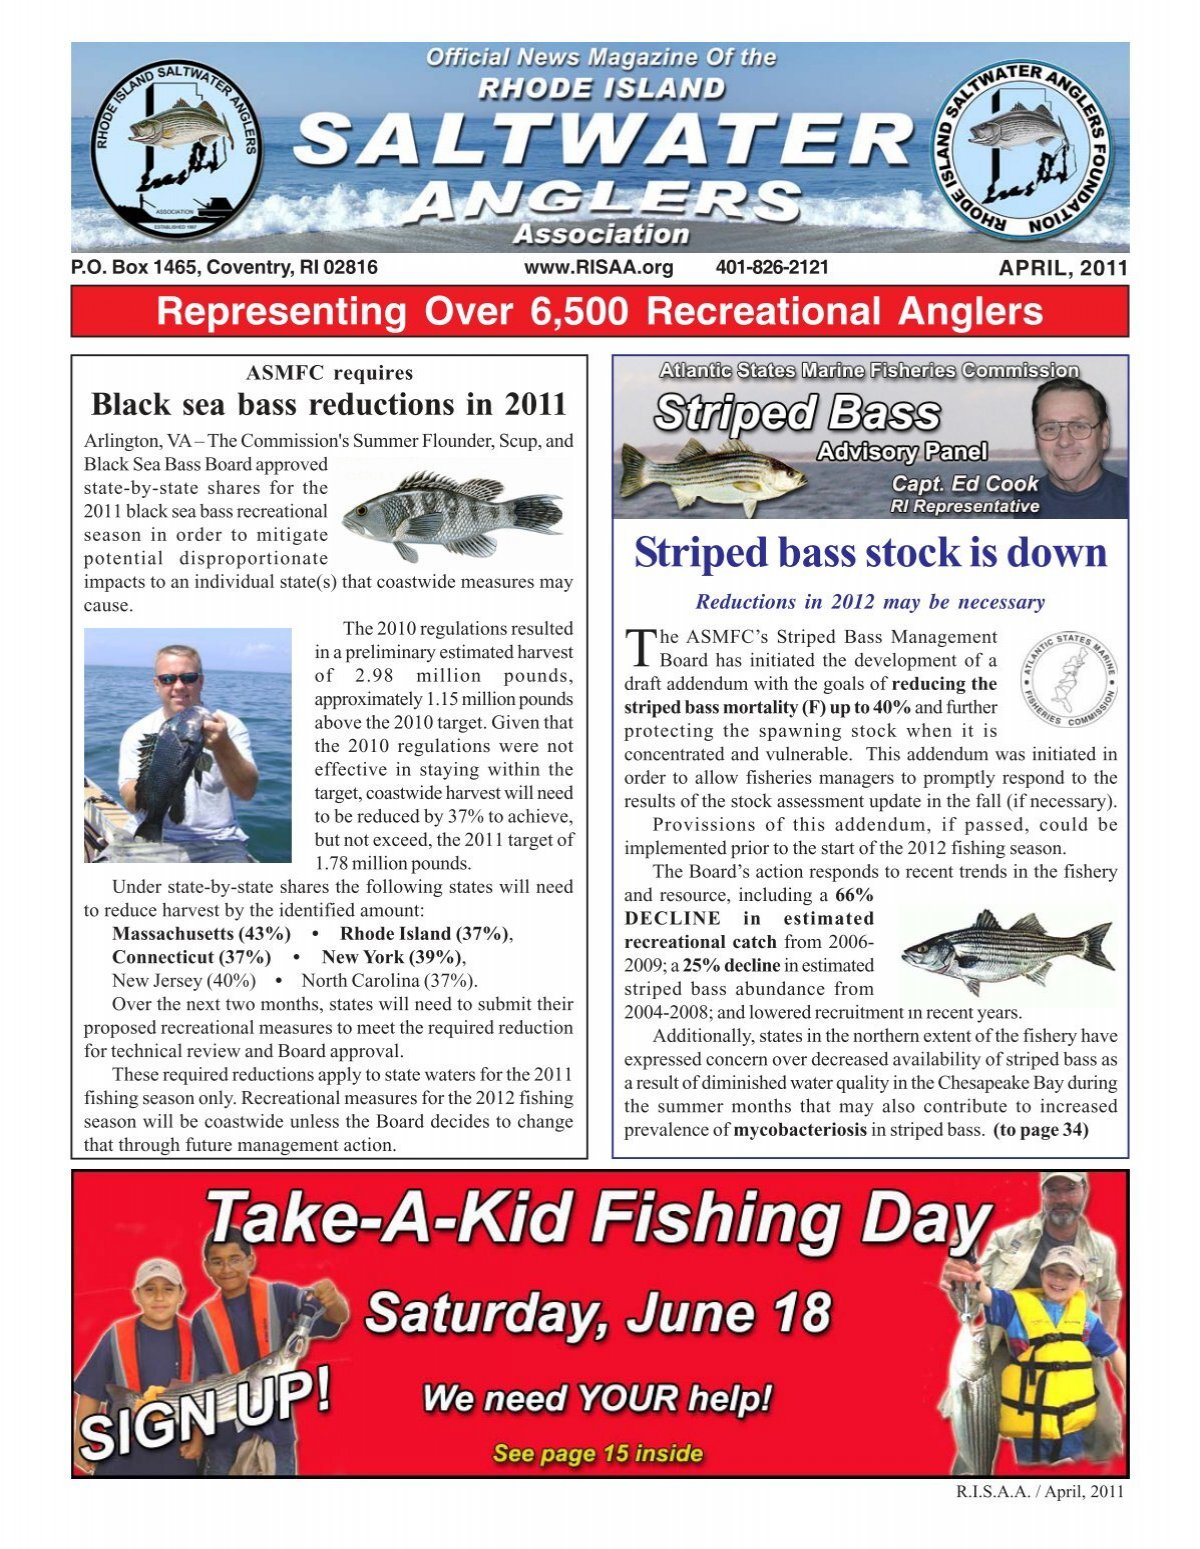 Striped bass stock is down - The Rhode Island Saltwater Anglers